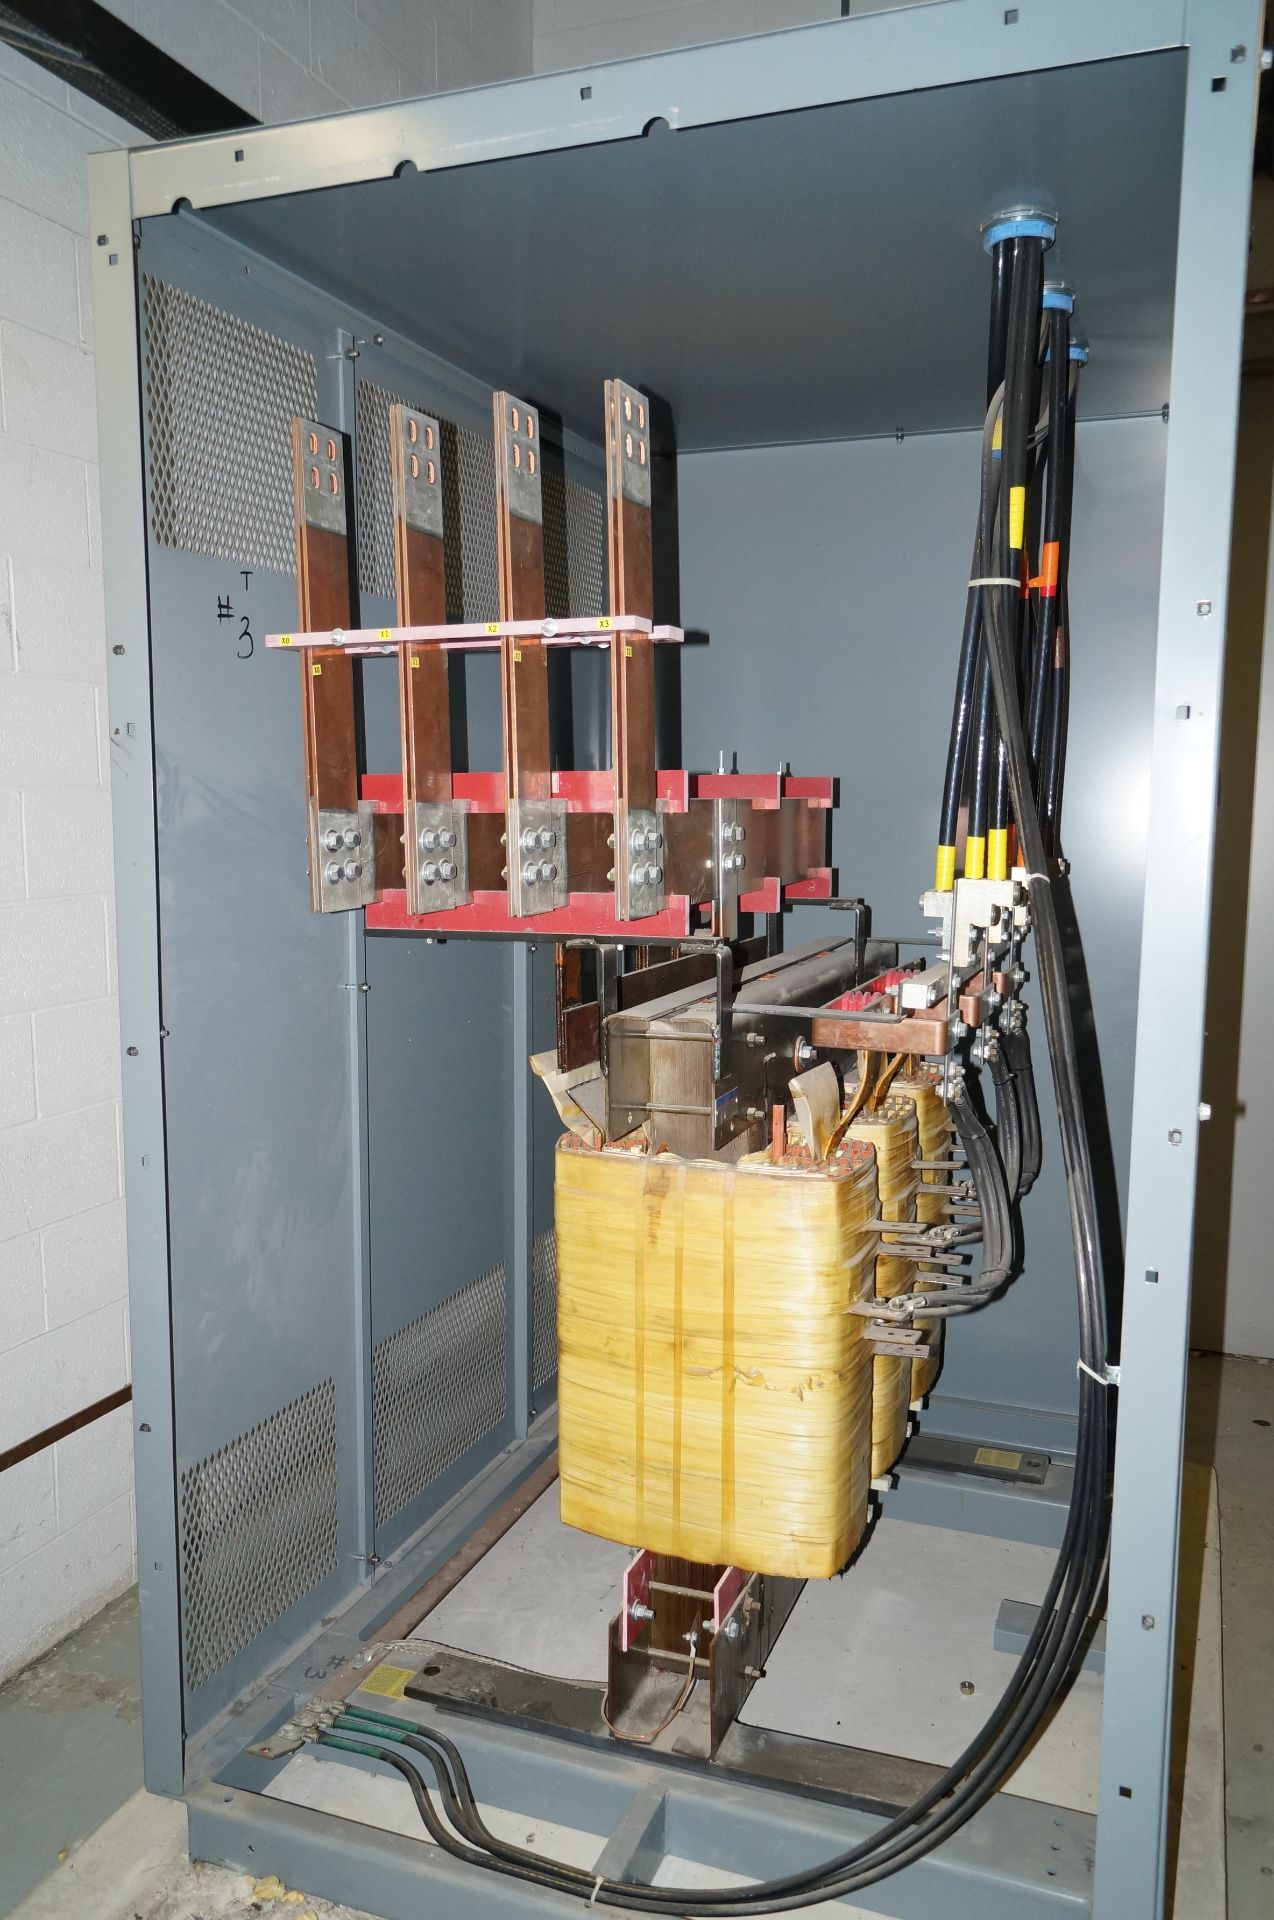 750 KVA SQUARE D SORGEL, 3 PHASE INSULATED TRANSFORMER, CLASS AA-FFA, WT 4800LBS, HZ 60, TYPE SO, - Image 2 of 3